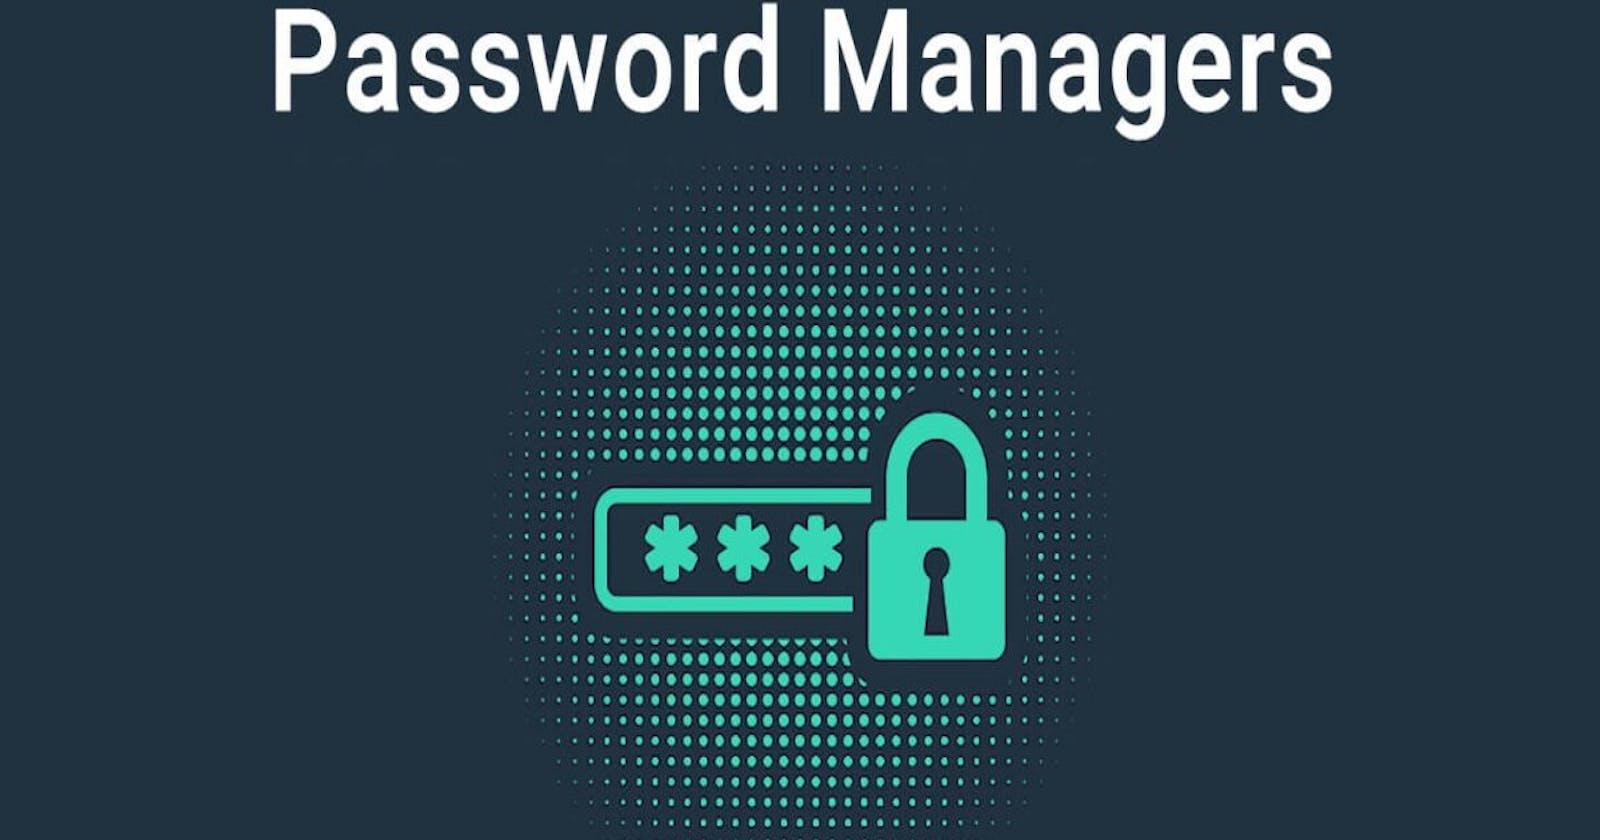 Why You Need A Password Manager